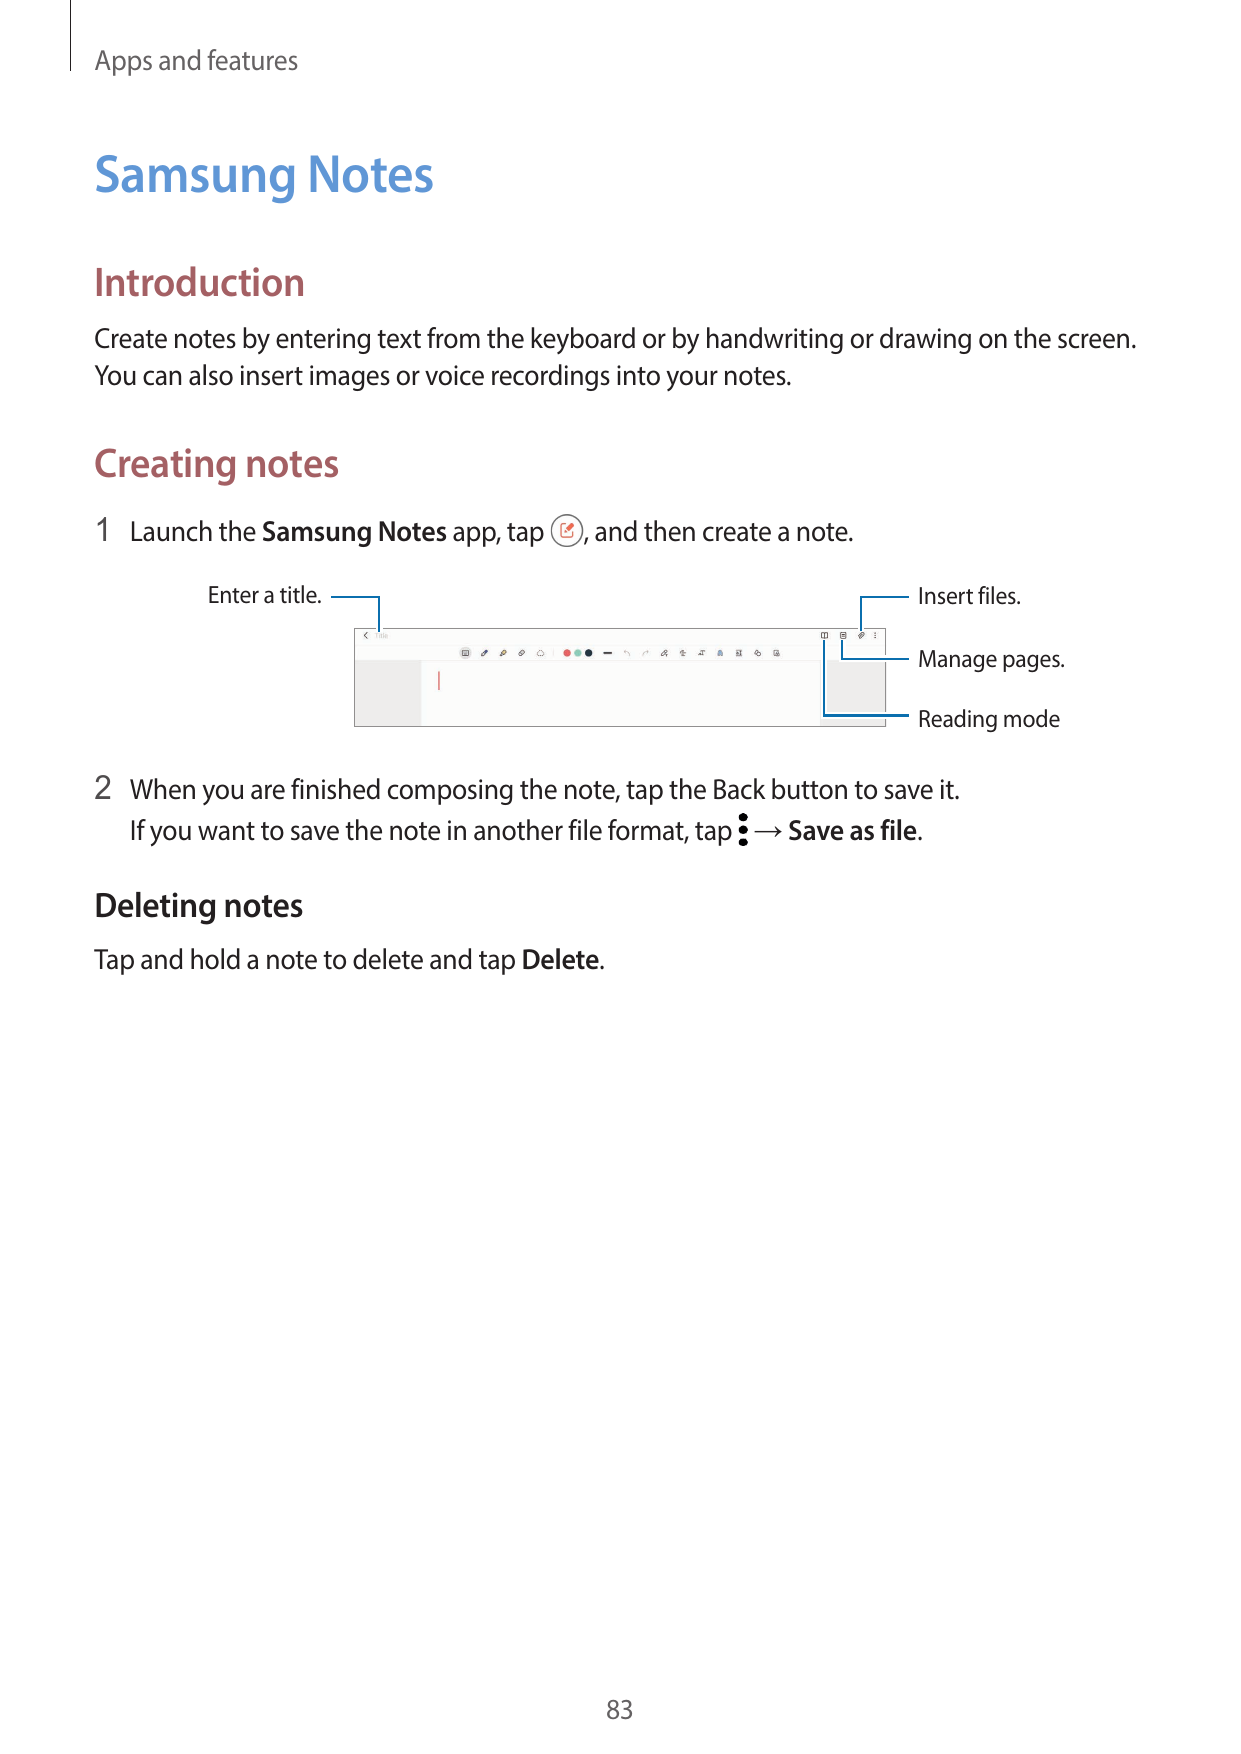 Apps and featuresSamsung NotesIntroductionCreate notes by entering text from the keyboard or by handwriting or drawing on the sc